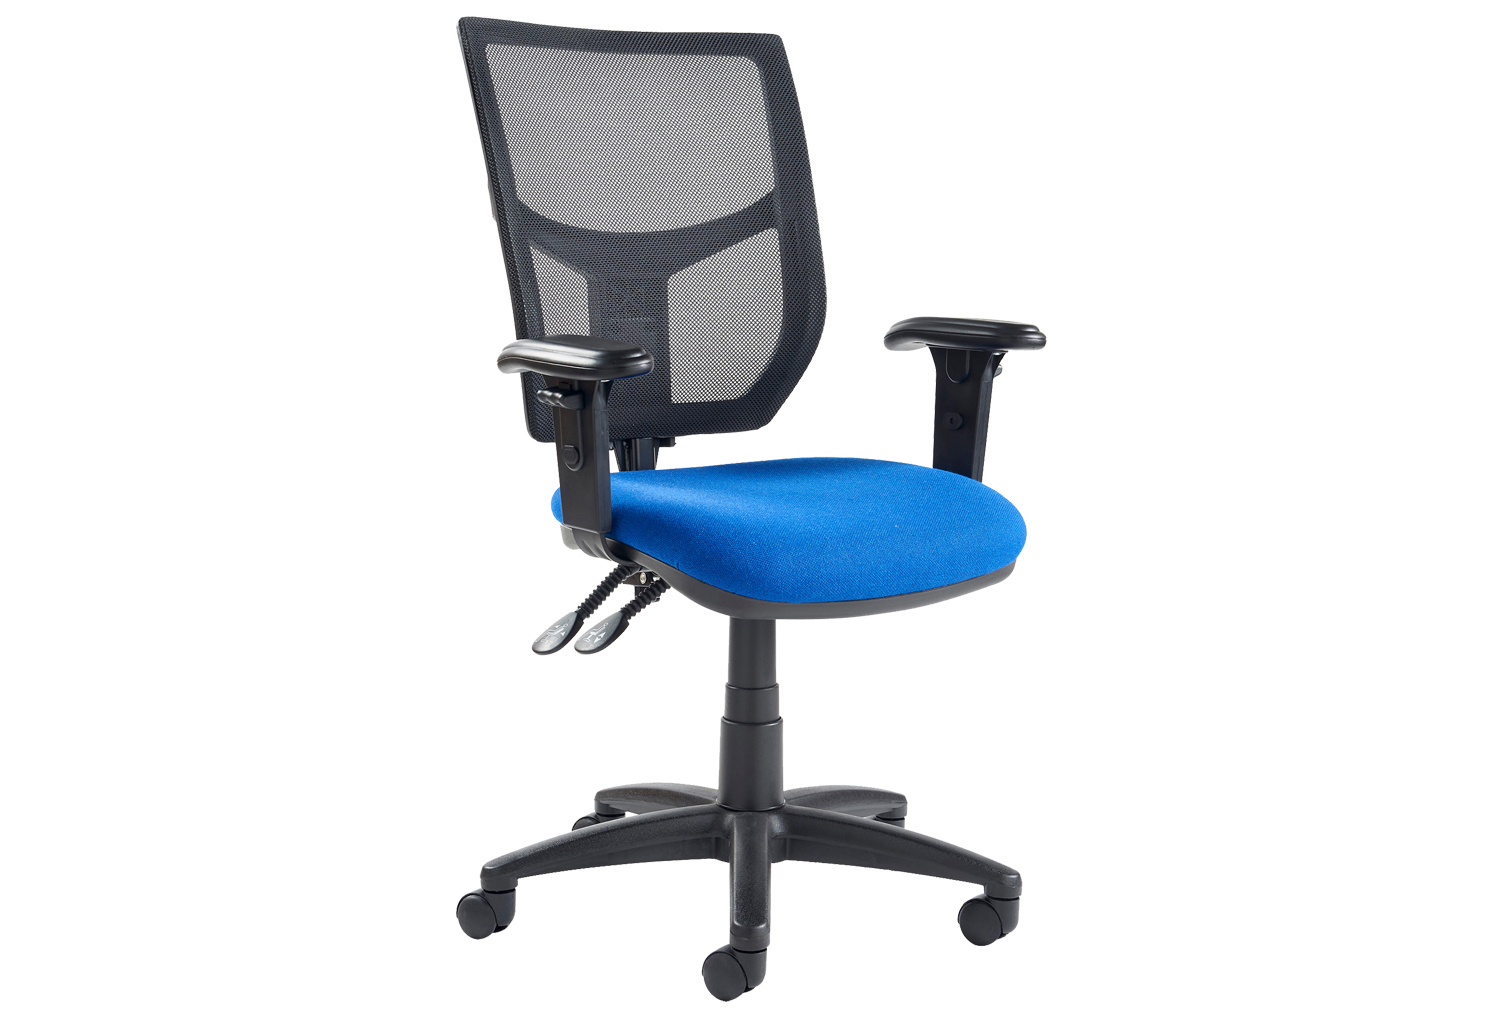 Gordy 3 Lever High Mesh Back Operator Office Chair With Adjustable Arms, Black, Bridgetown, Fully Installed